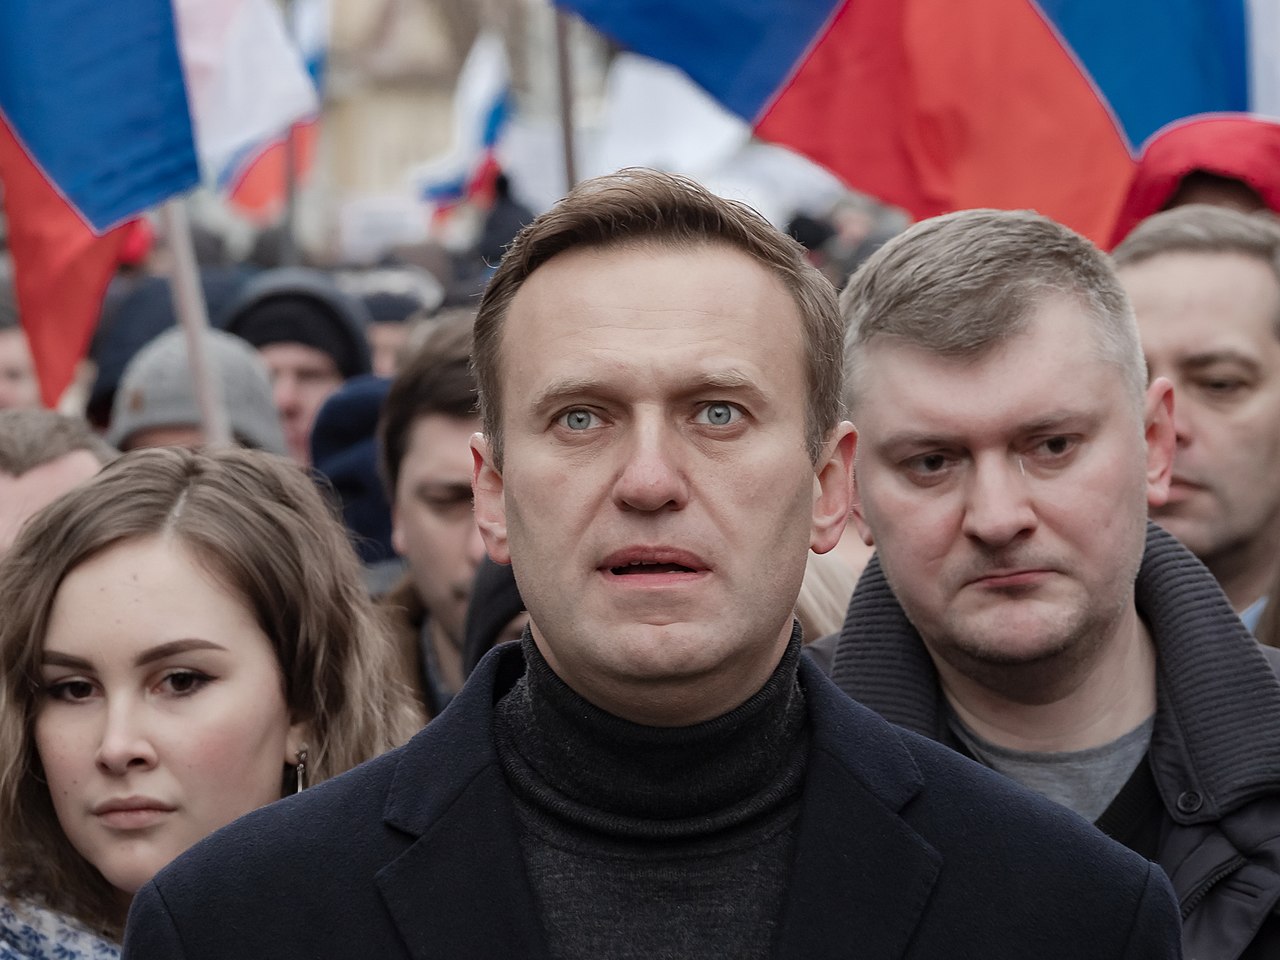 Does Russia’s war have popular support? Navalny says not